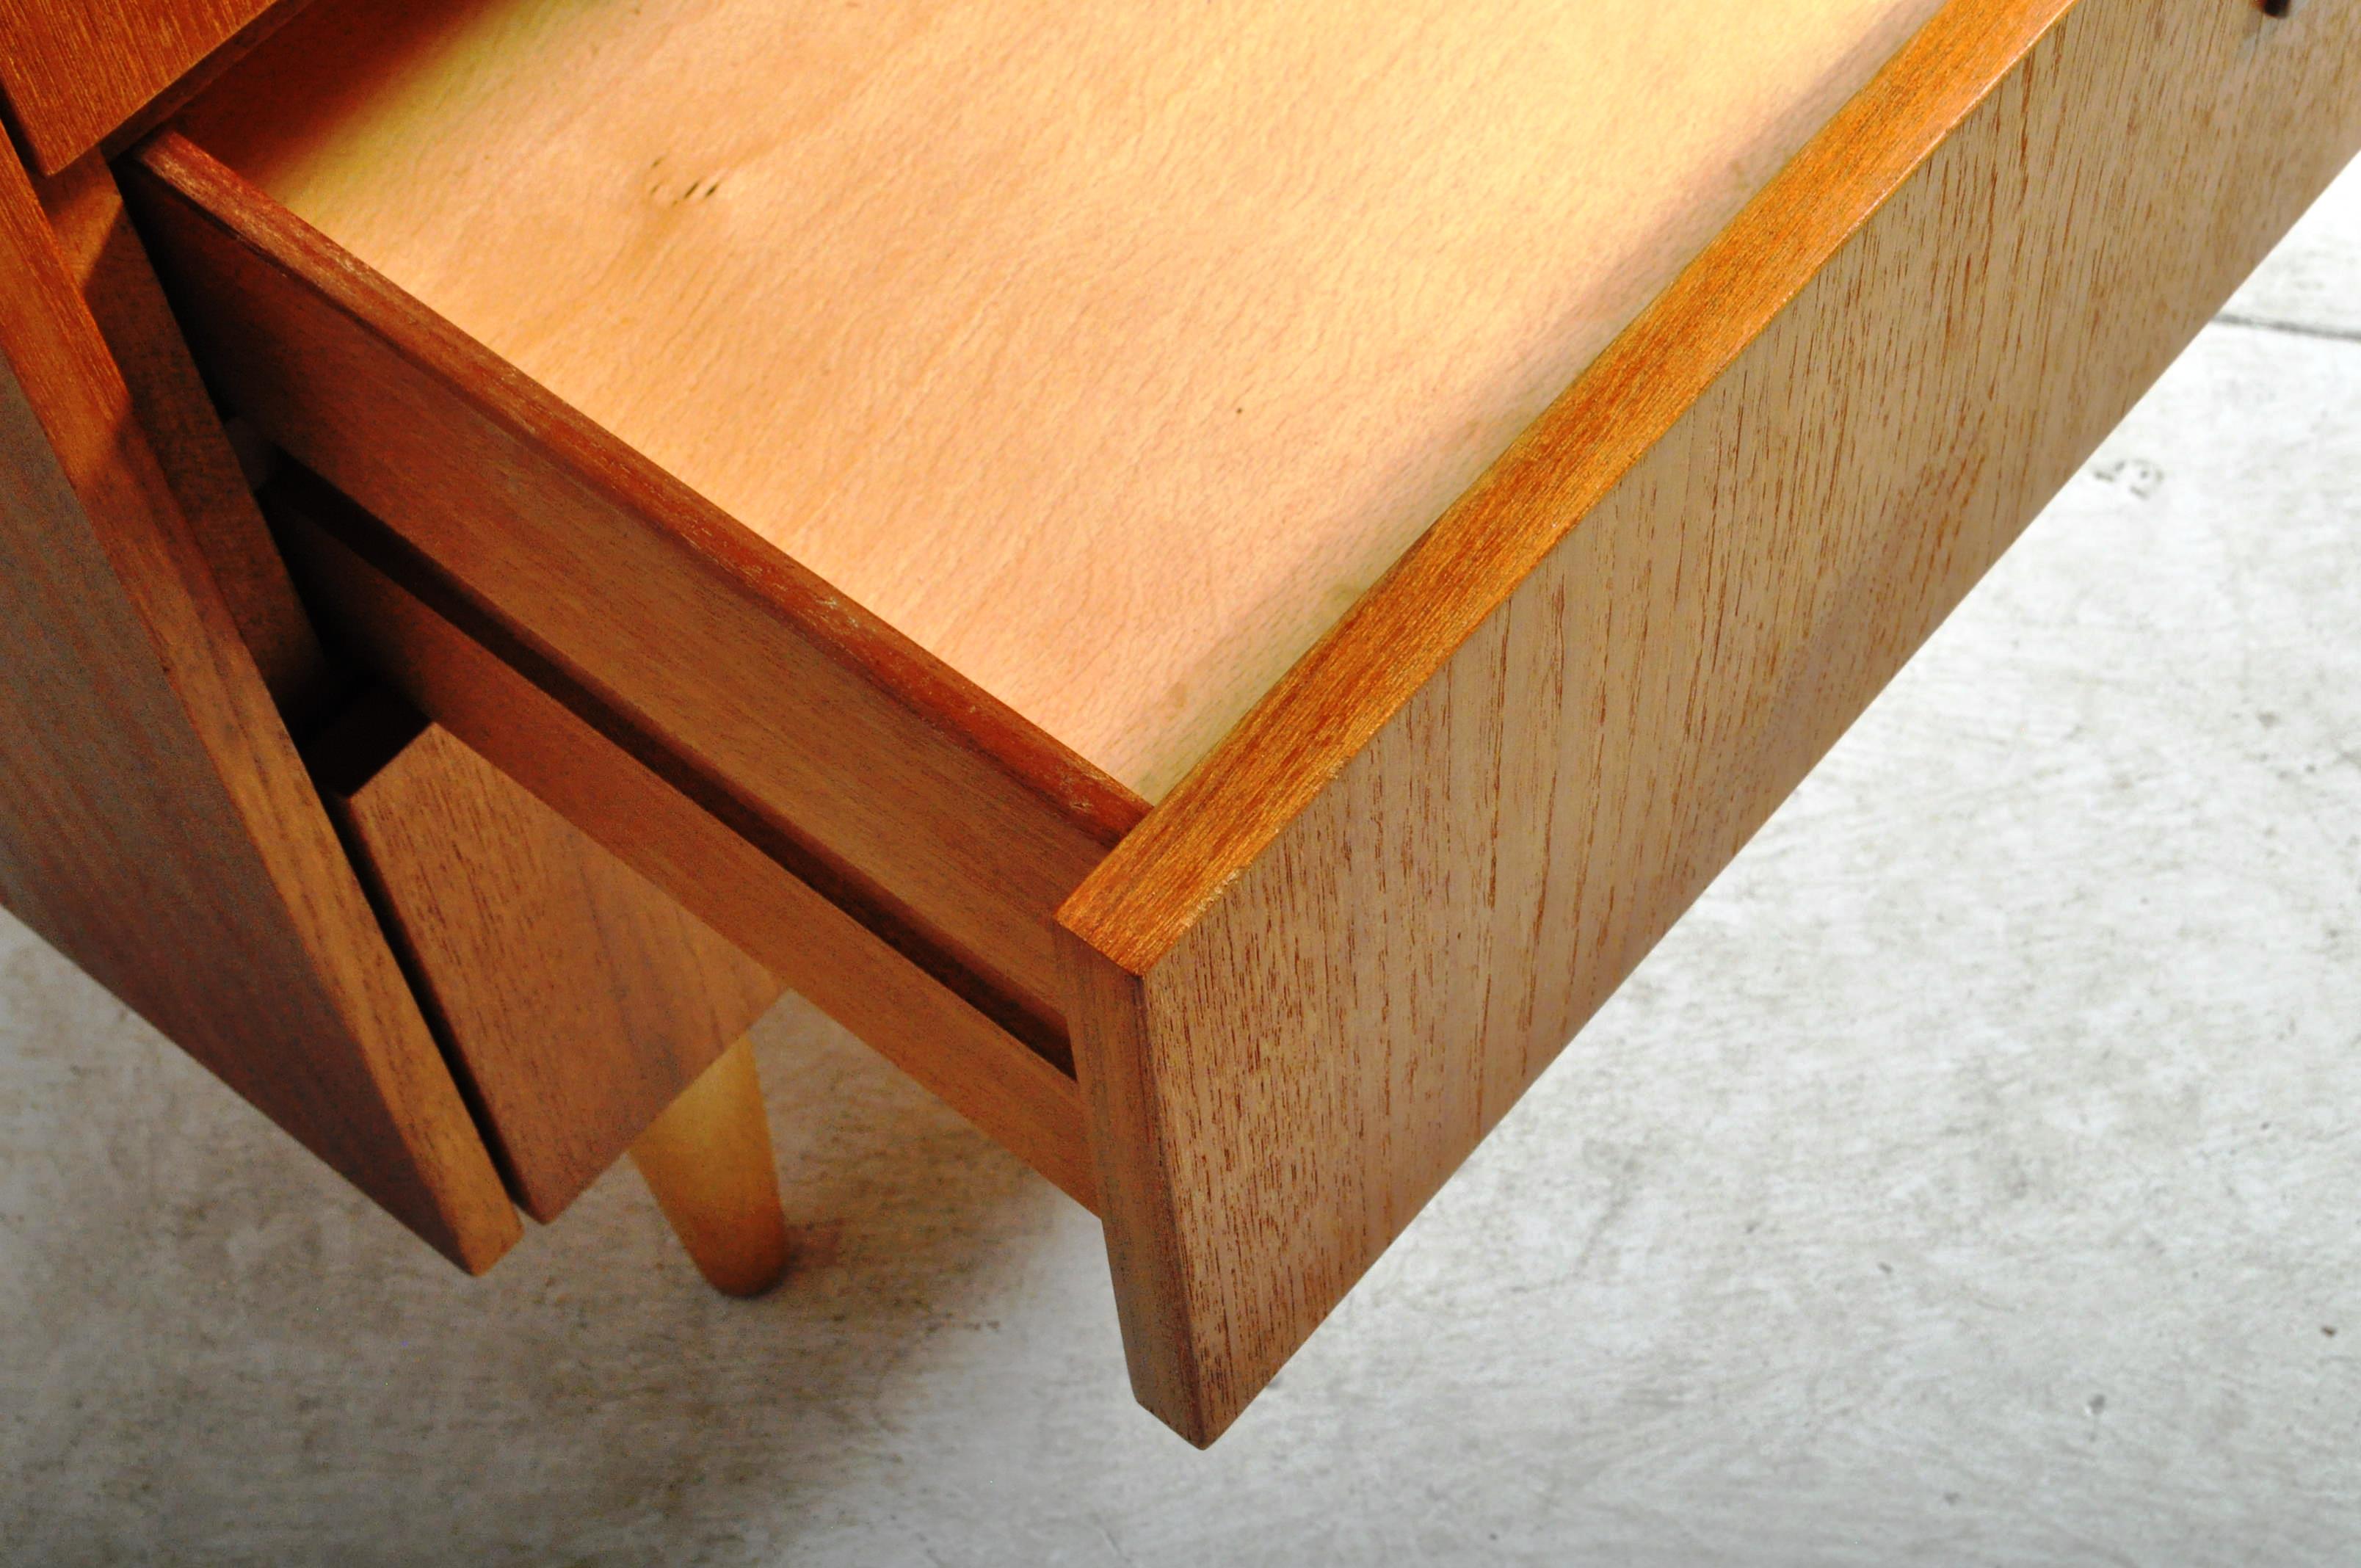 JENTIQUE - MID 20TH CENTURY TEAK CHEST OF DRAWERS - Image 6 of 8